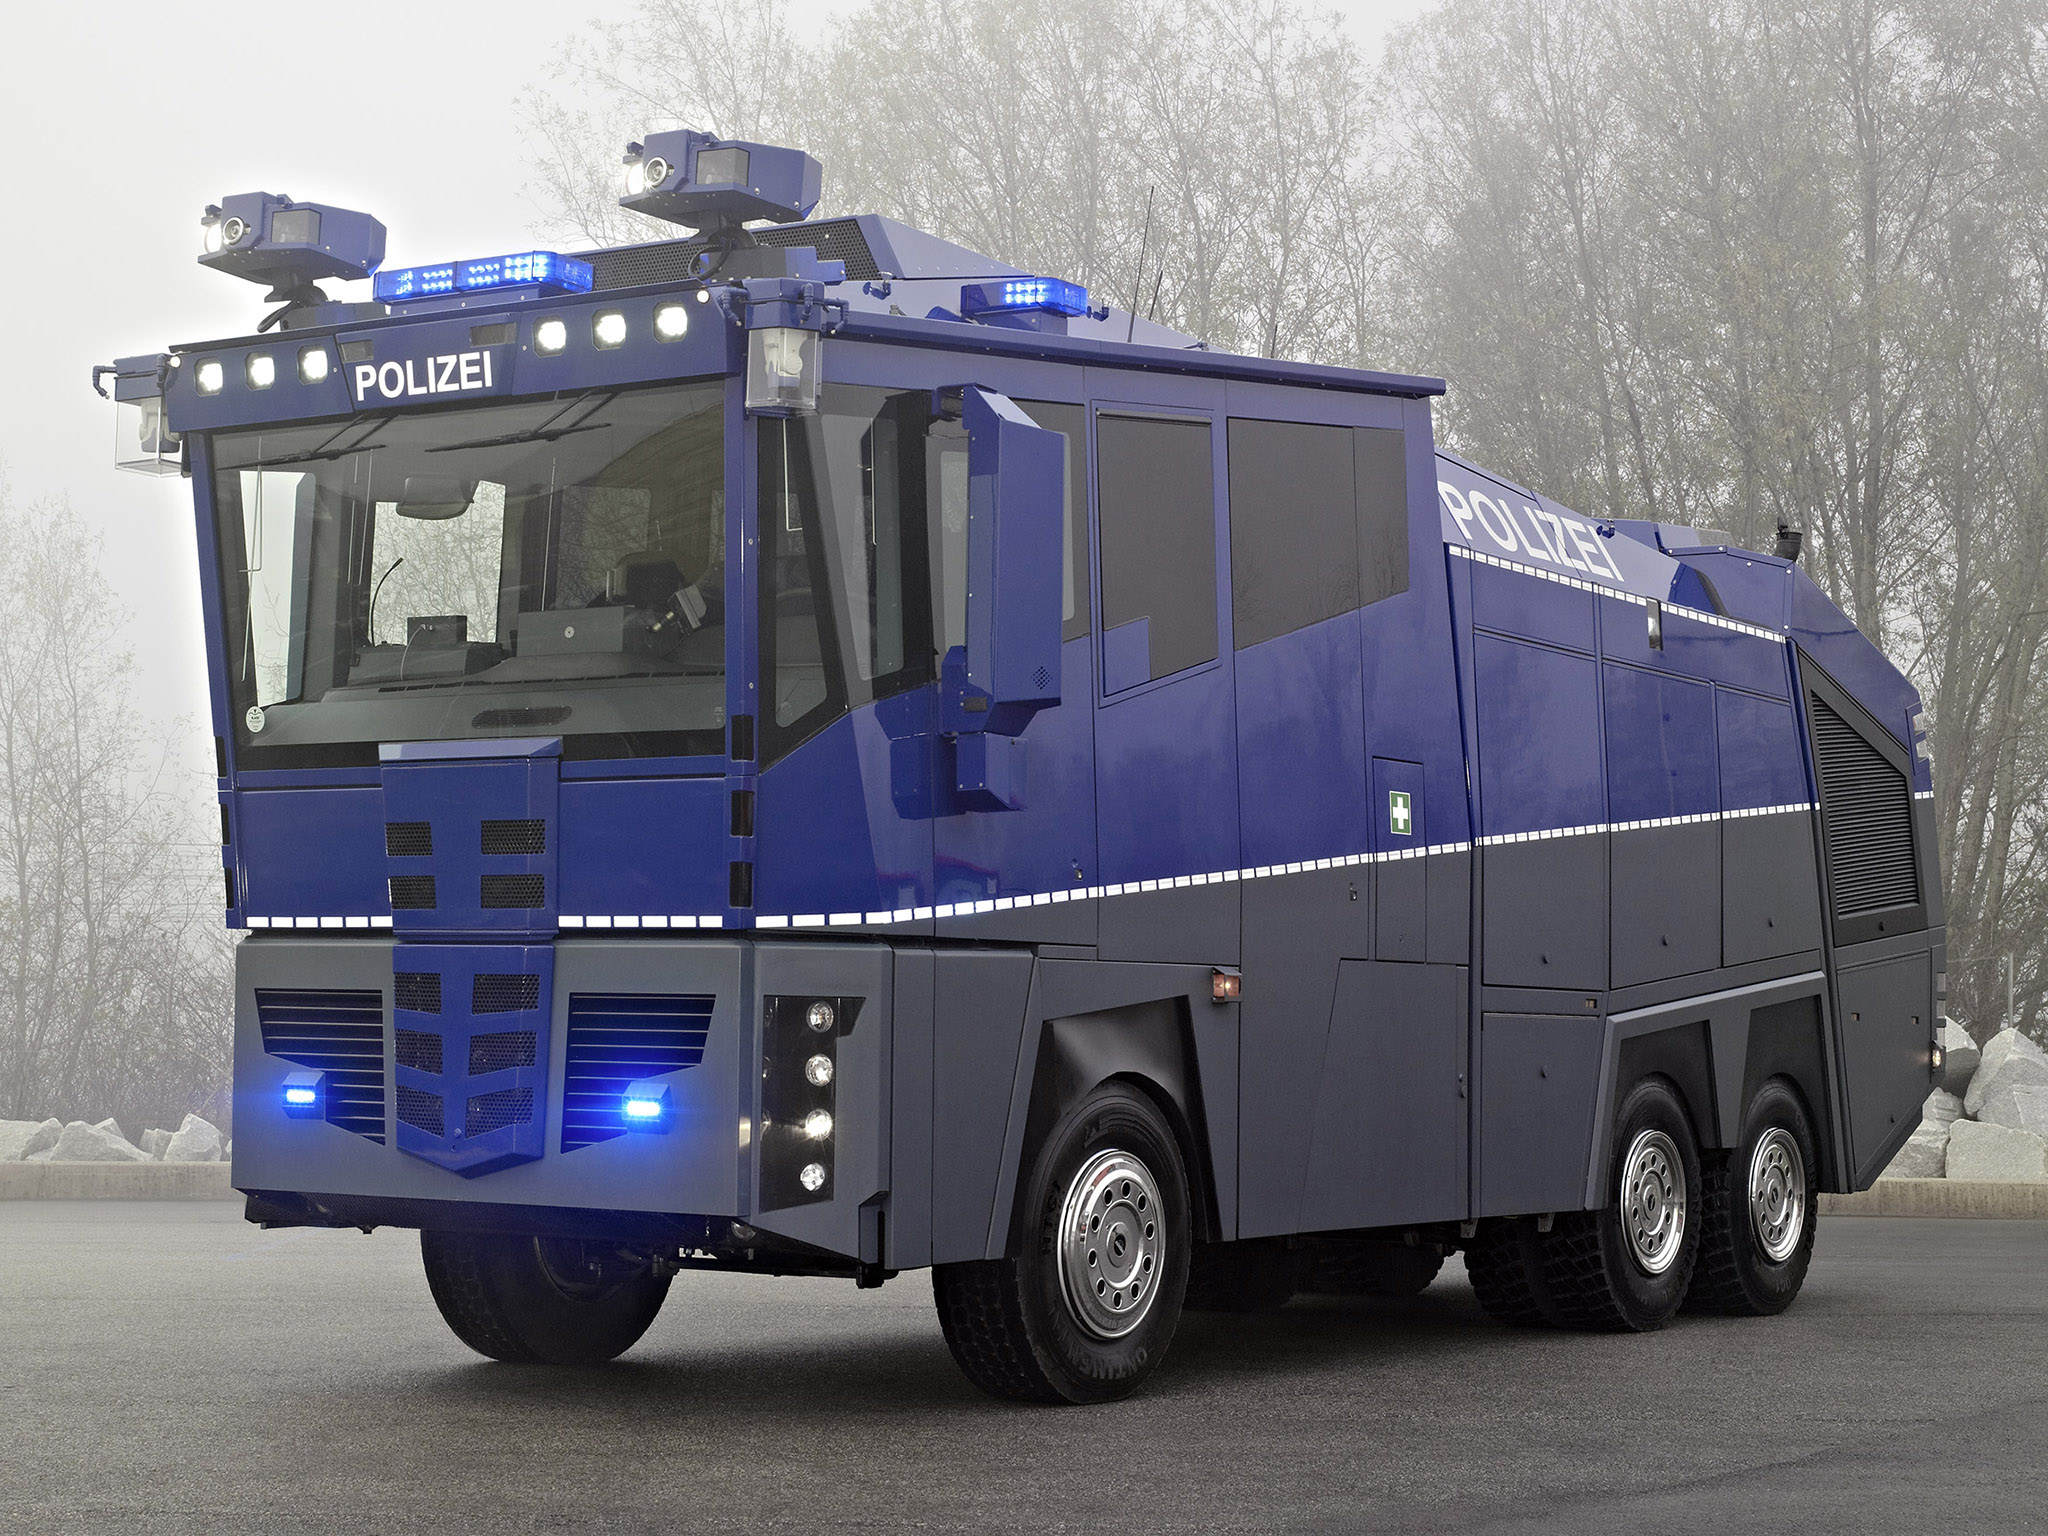 2009, Mercedes, Benz, Actros, 3341, 6x6, Police, Water, Cannon, Tractor, Semin, Truck Wallpaper